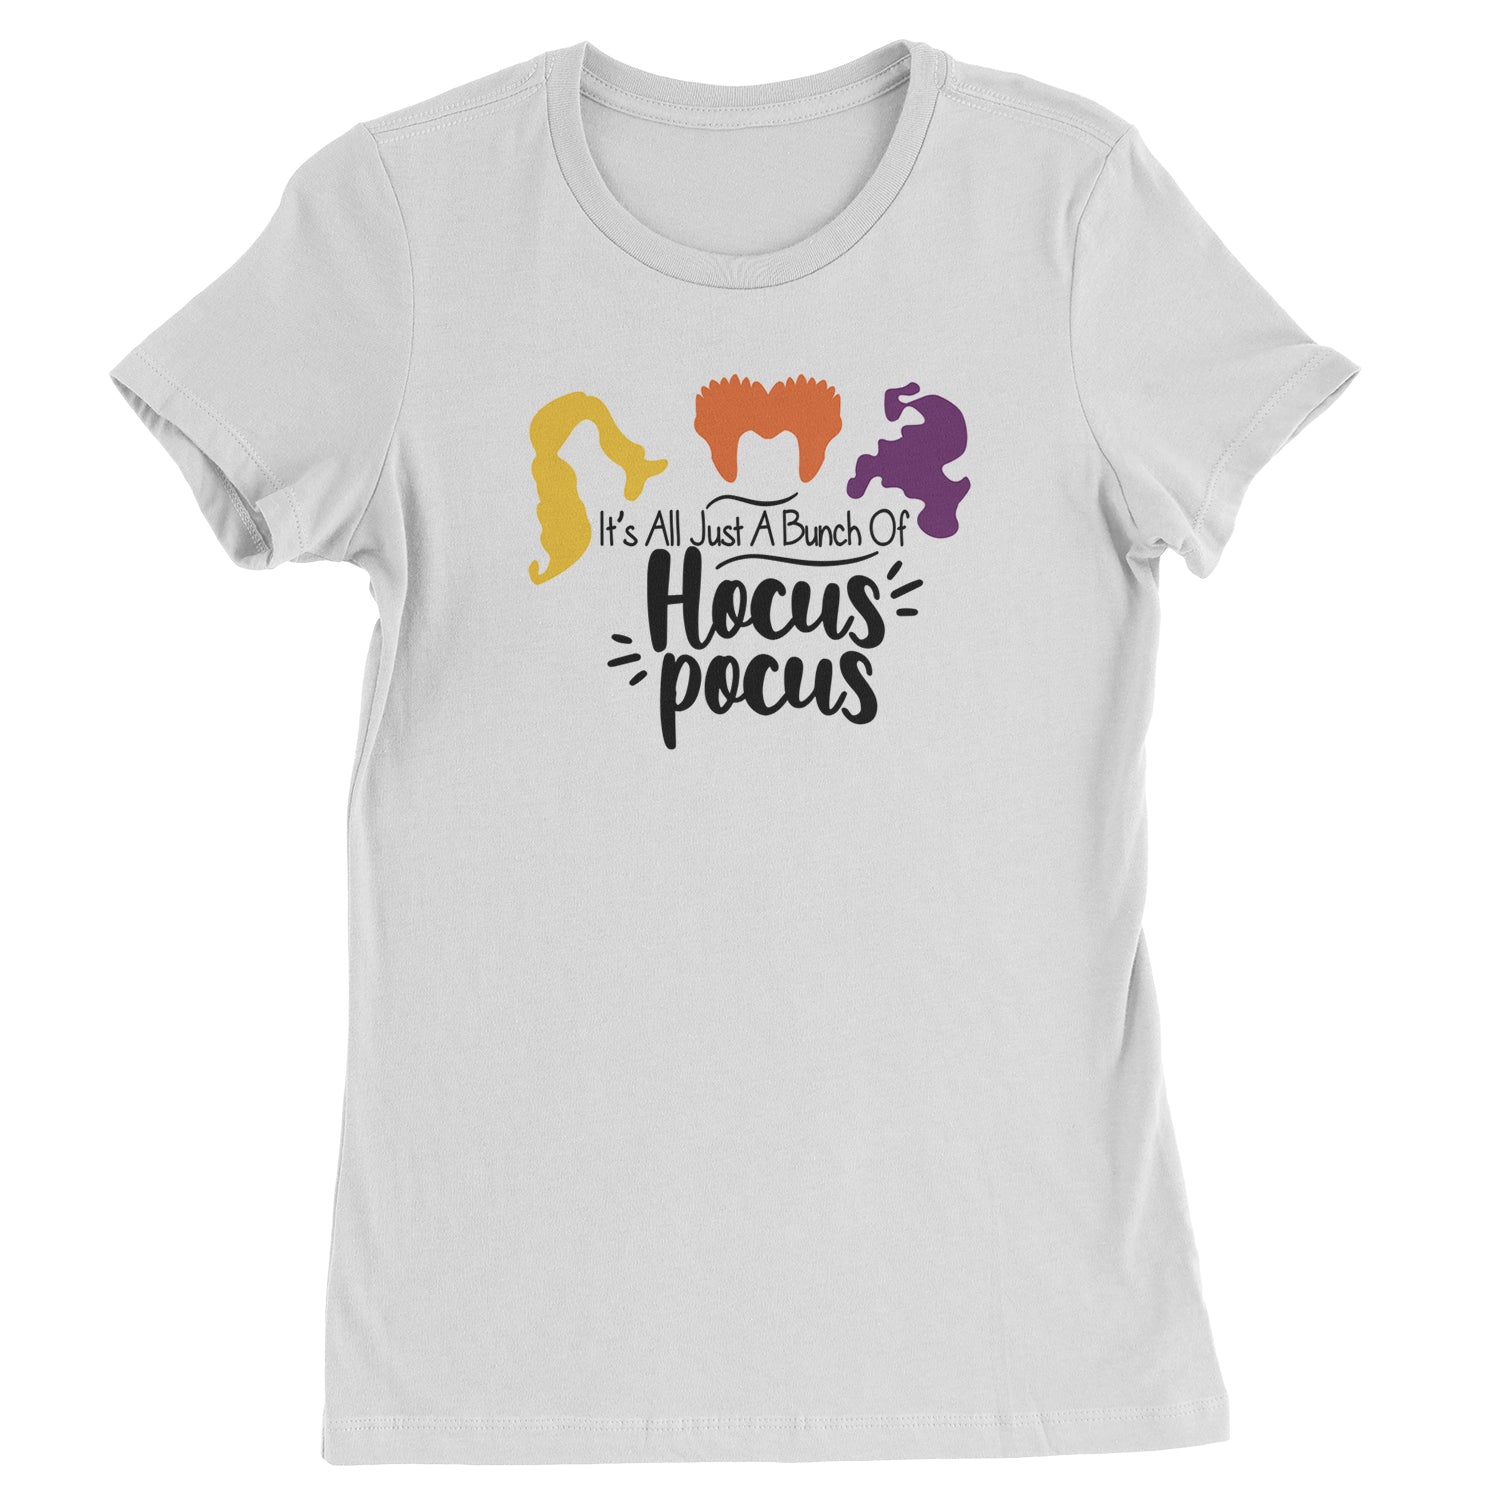 It's Just A Bunch Of Hocus Pocus Womens T-shirt descendants, enchanted, eve, hallows, hocus, or, pocus, sanderson, sisters, treat, trick, witches by Expression Tees